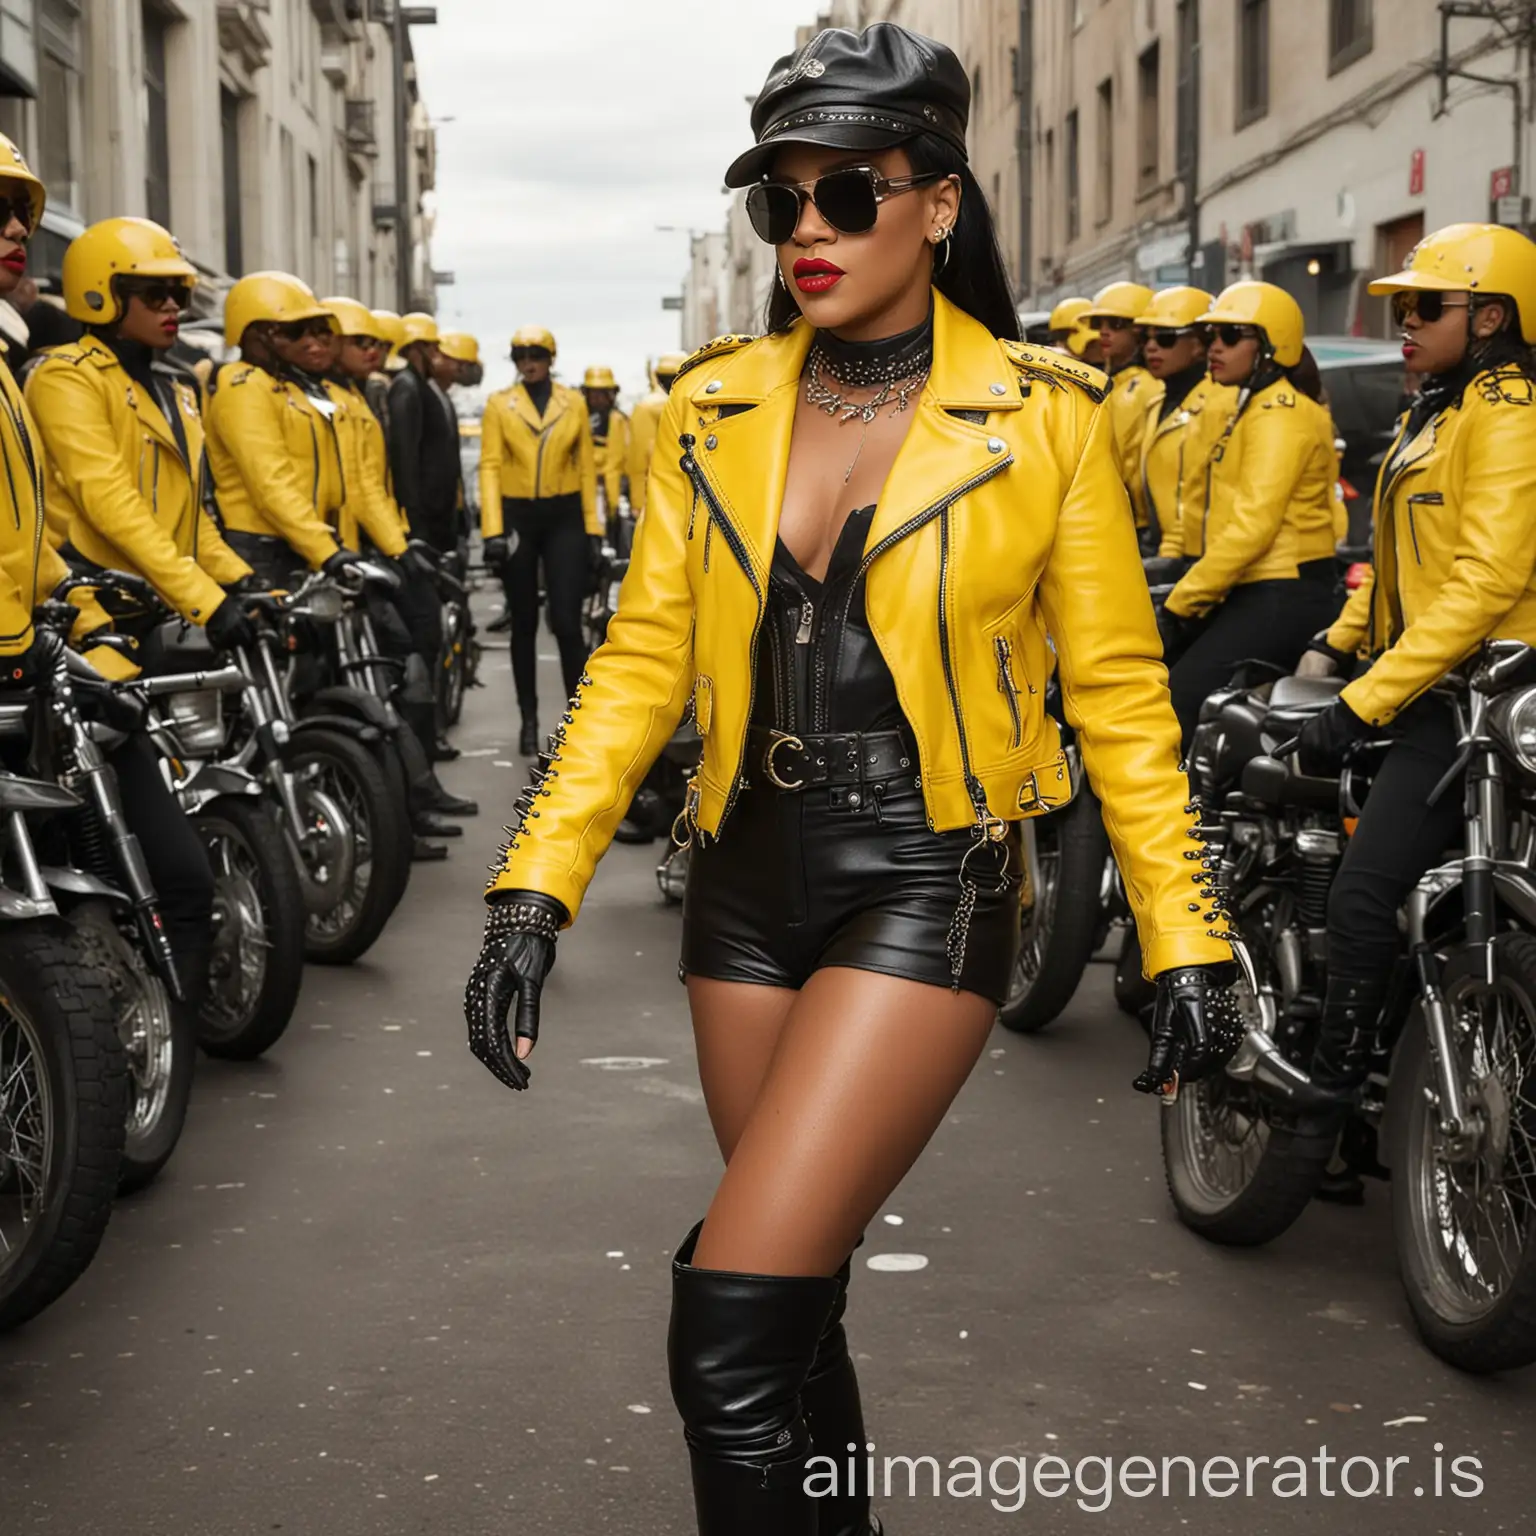 worship rihanna wearing tight yellow leather motorcycle jacket, leather gloves, leather biker cap with high heel leather boots with spikes and yellow lipstick, mirrored sunglasses, neck corset